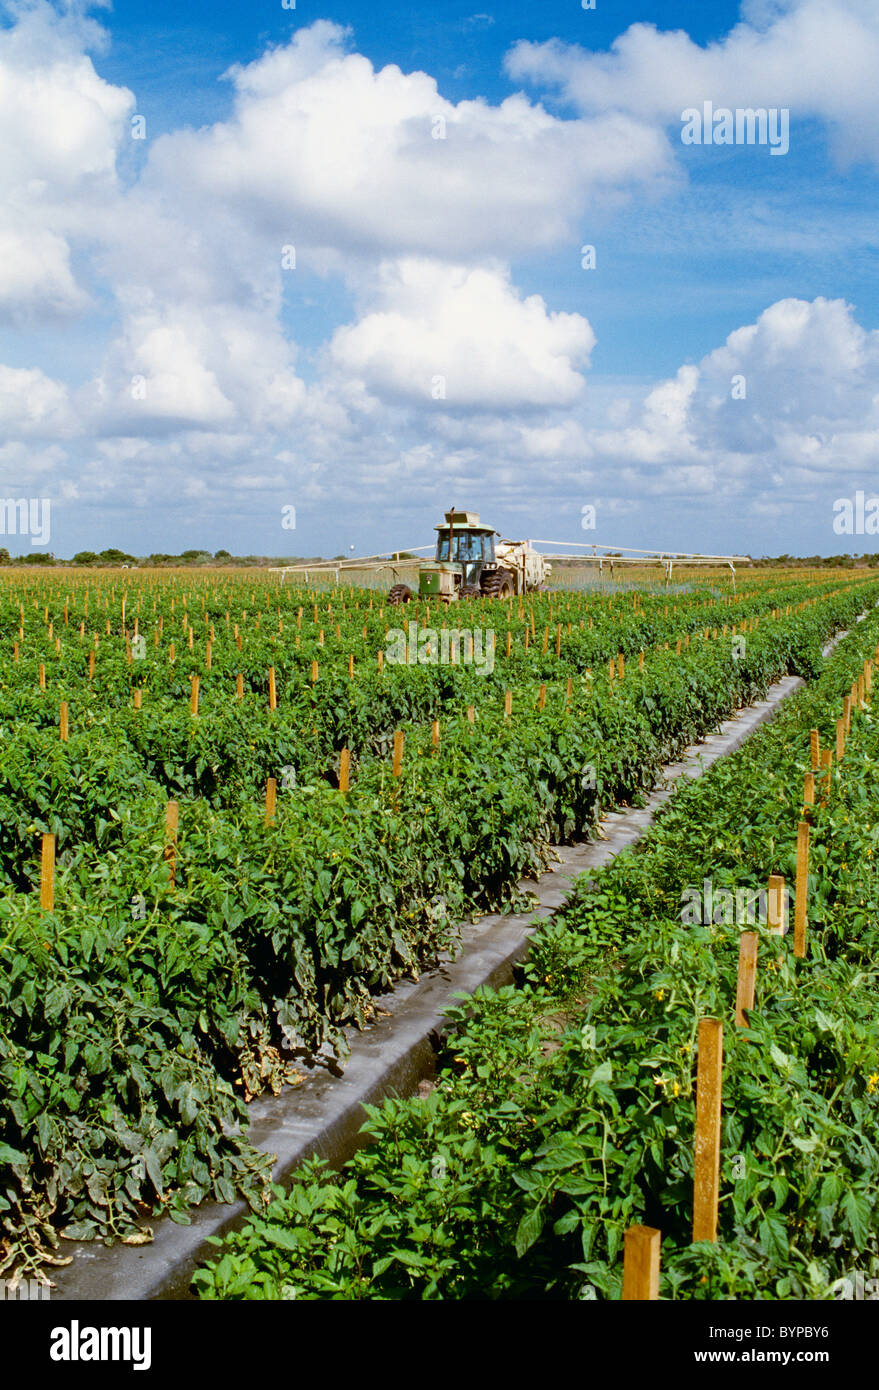 Agriculture - Chemical application of fungicide and insecticide on fresh market tomatoes / Florida, USA. Stock Photo